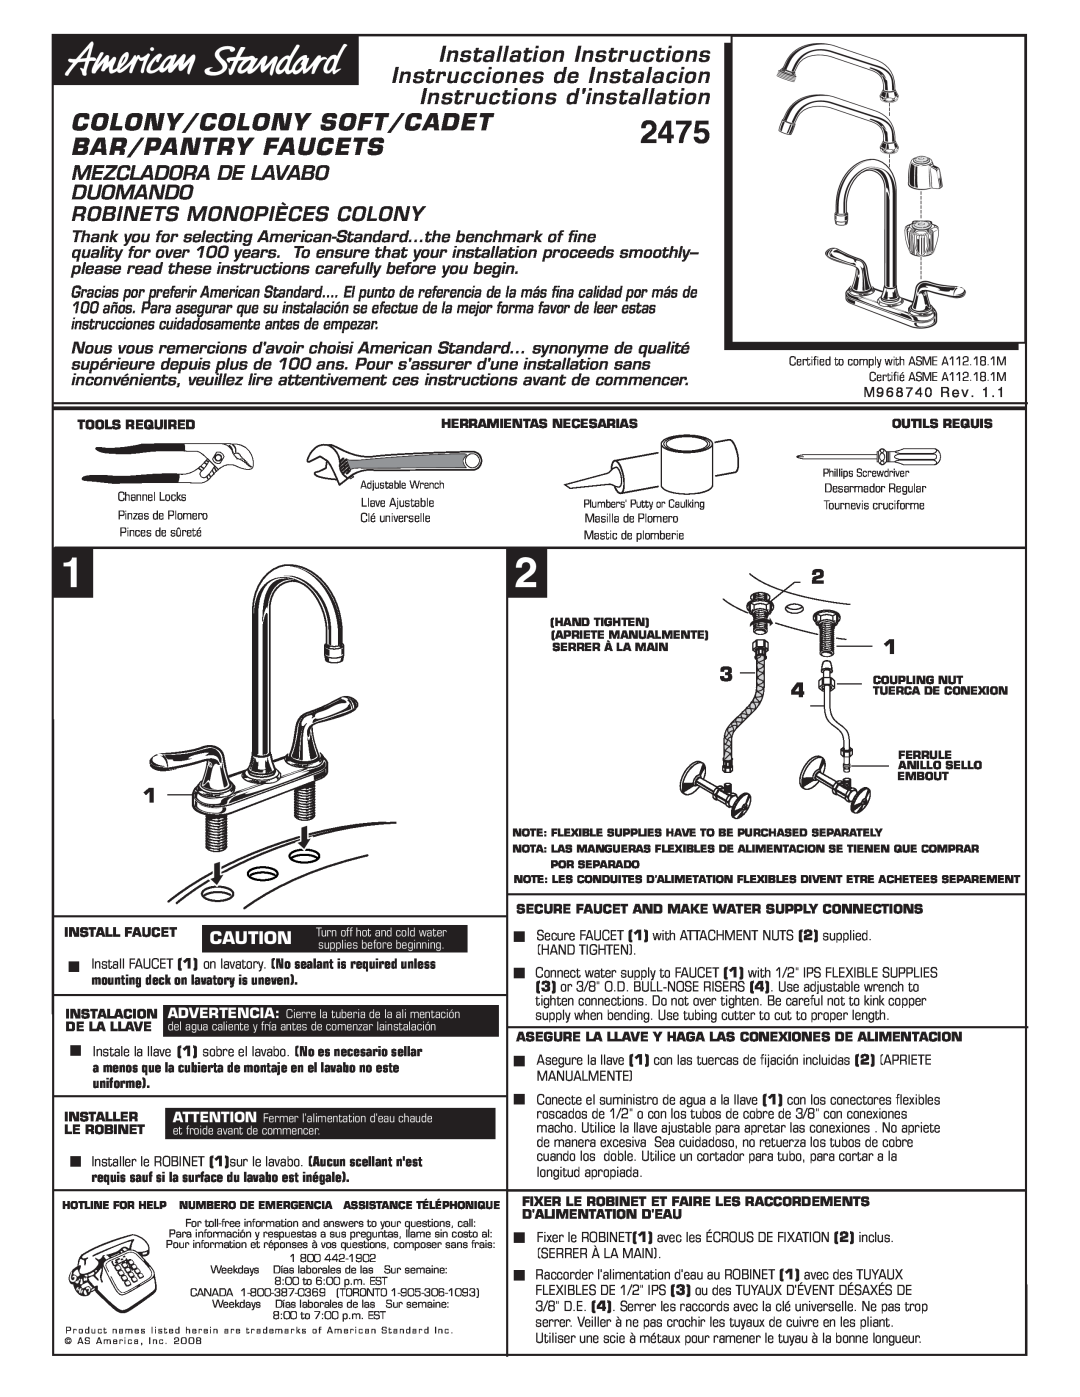 American Standard 2475 installation instructions Colony/Colony Soft/Cadet, Bar/Pantry Faucets, Installation Instructions 